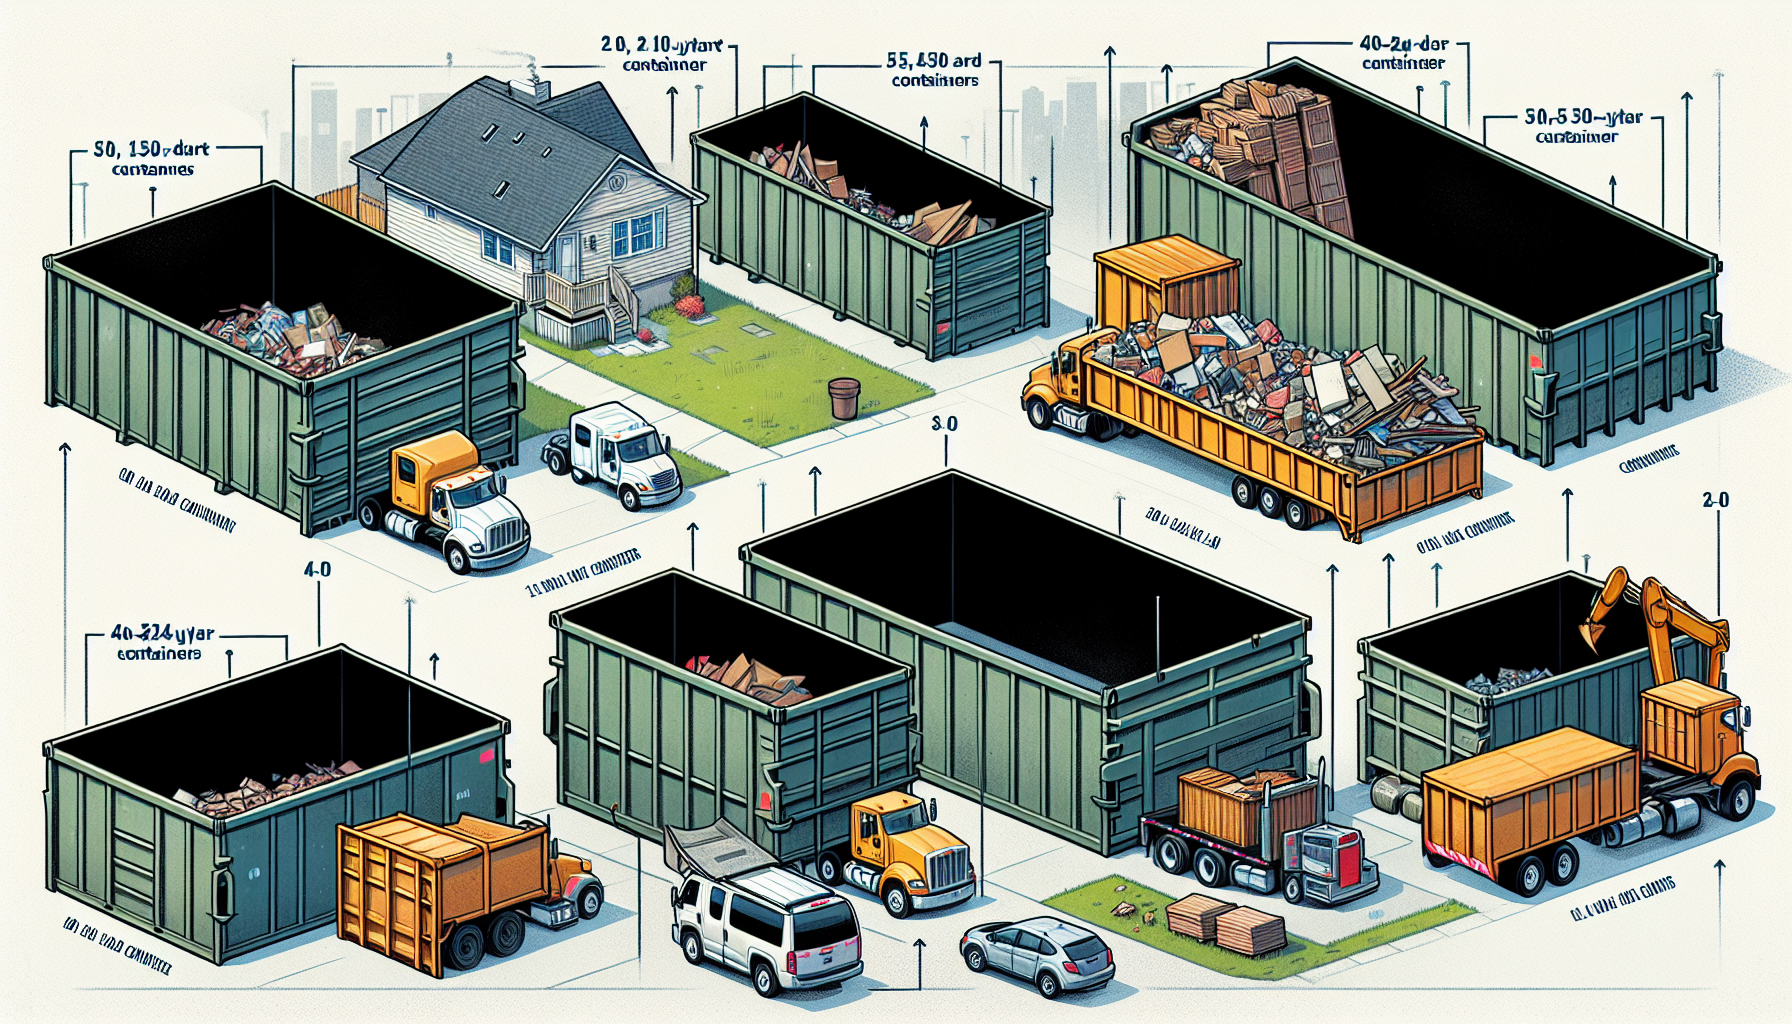 Choosing the right dumpster size